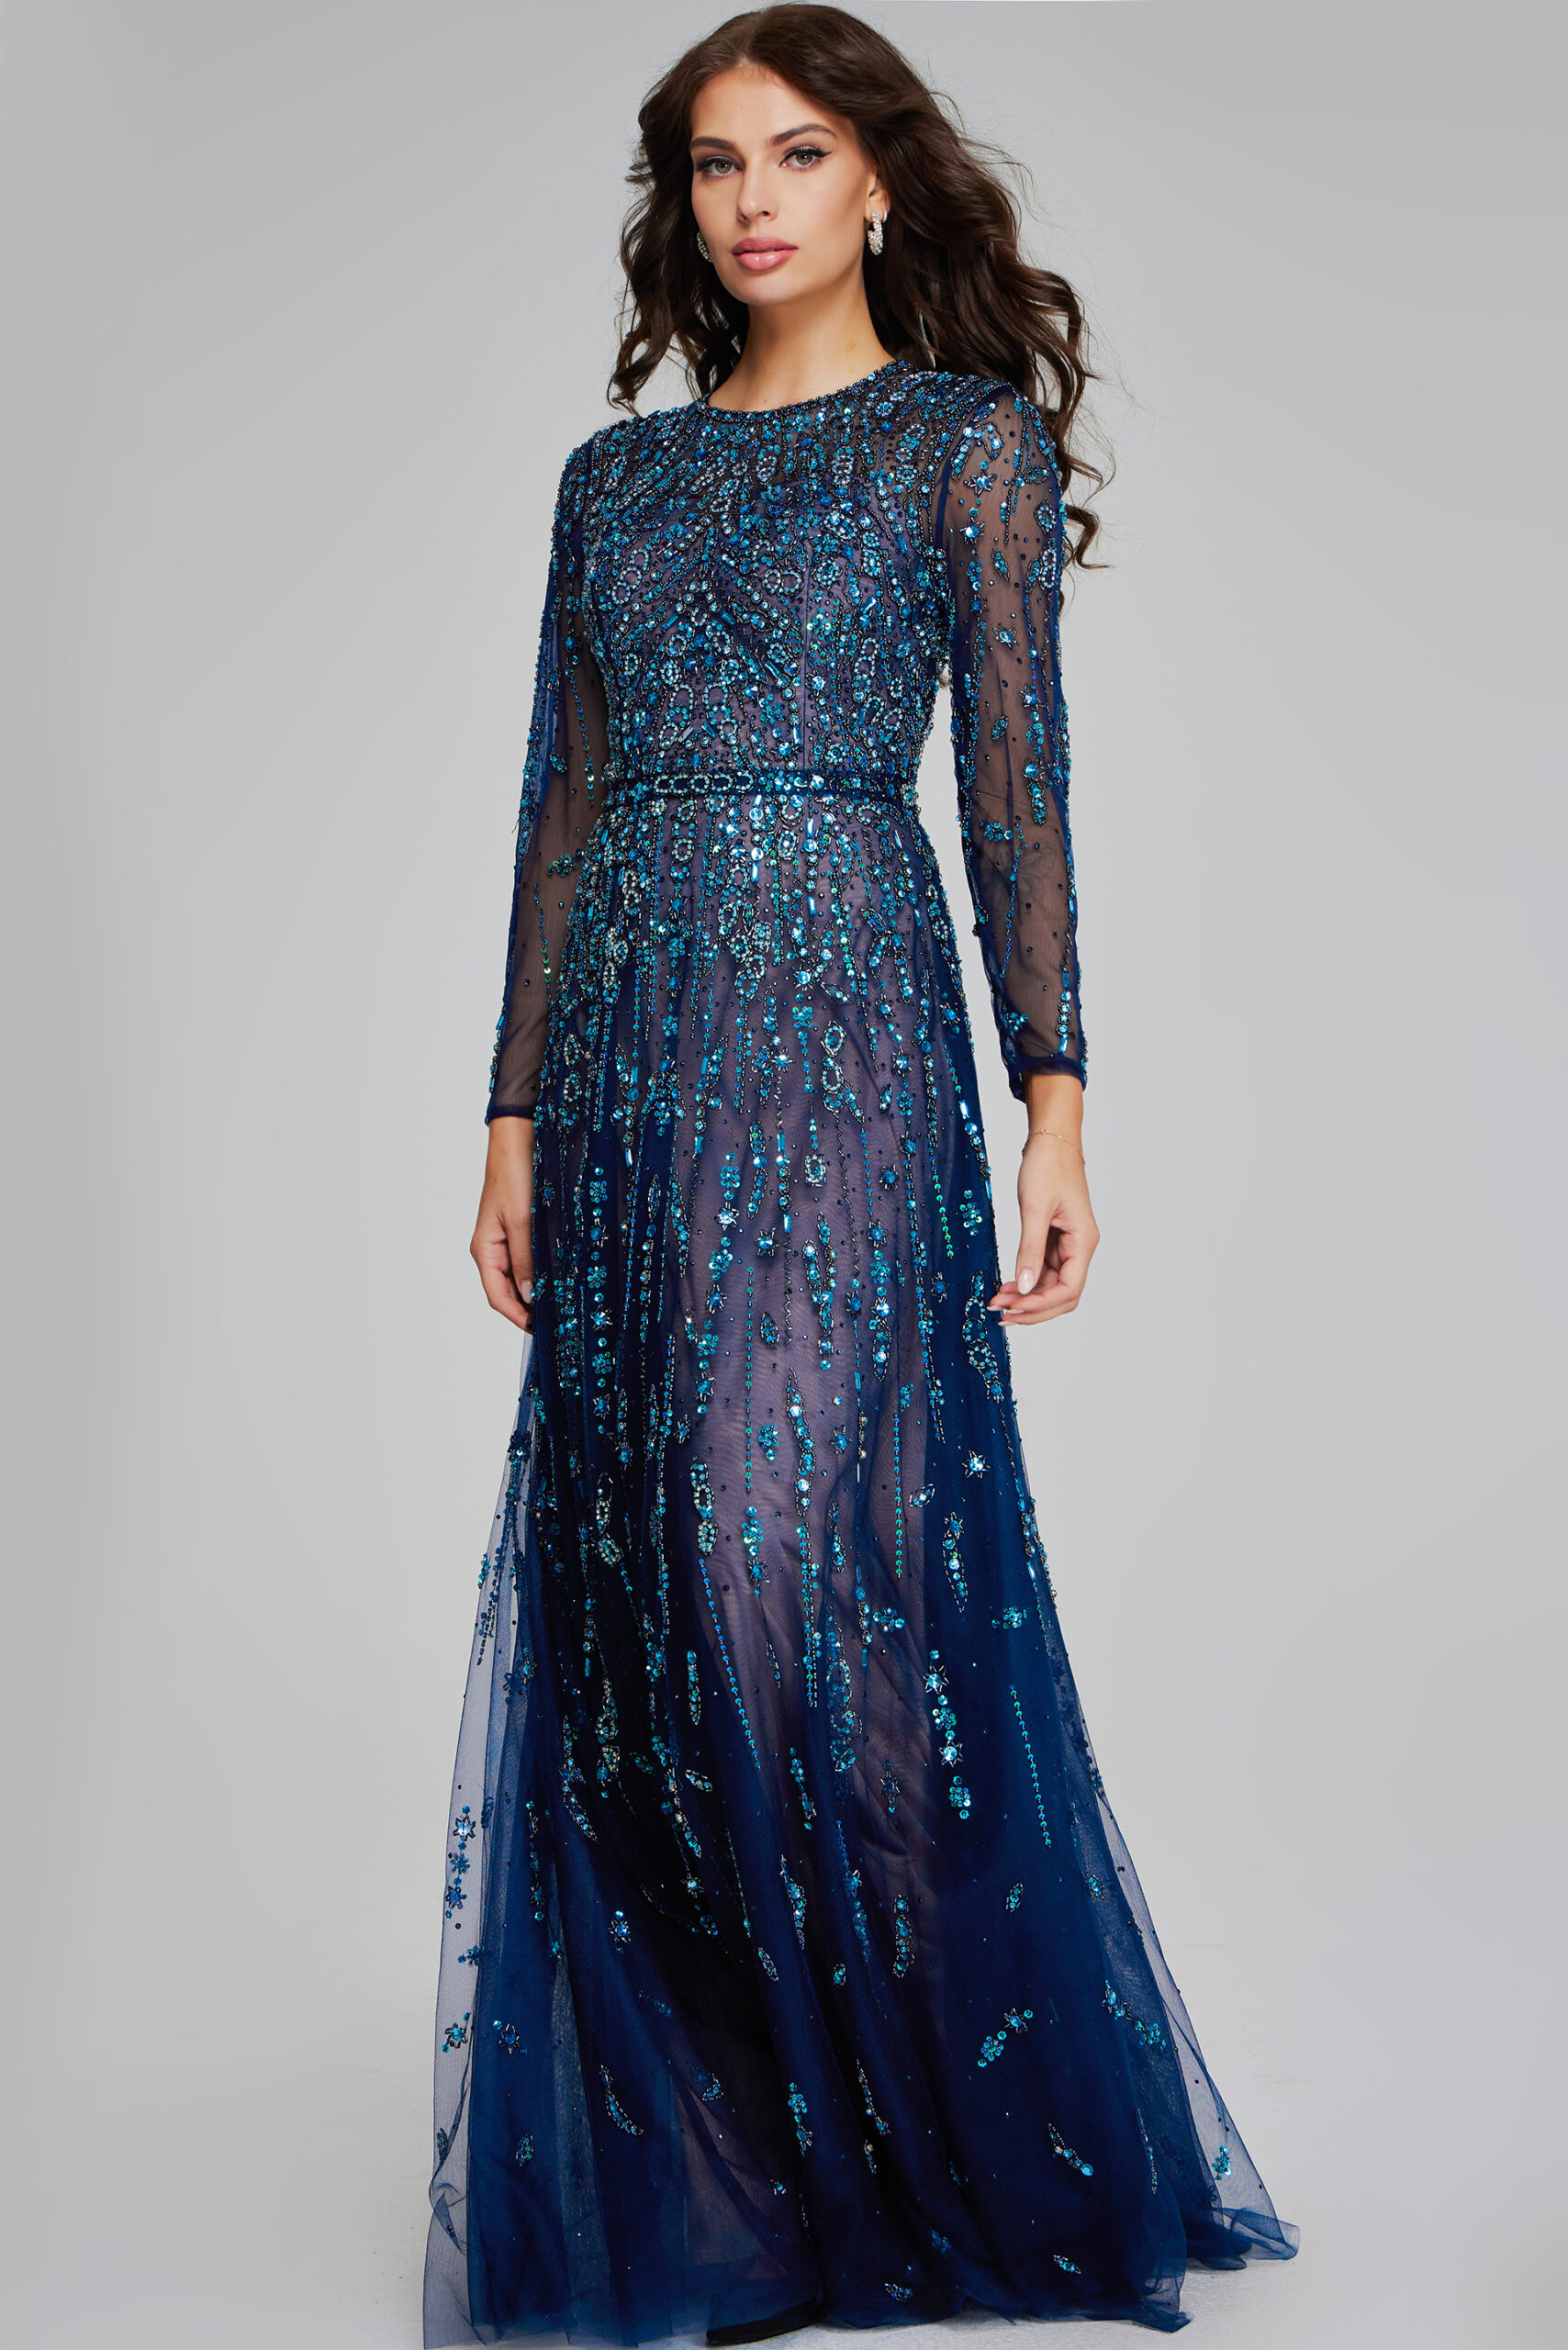 Model wearing Navy Embellished Evening Gown 80807